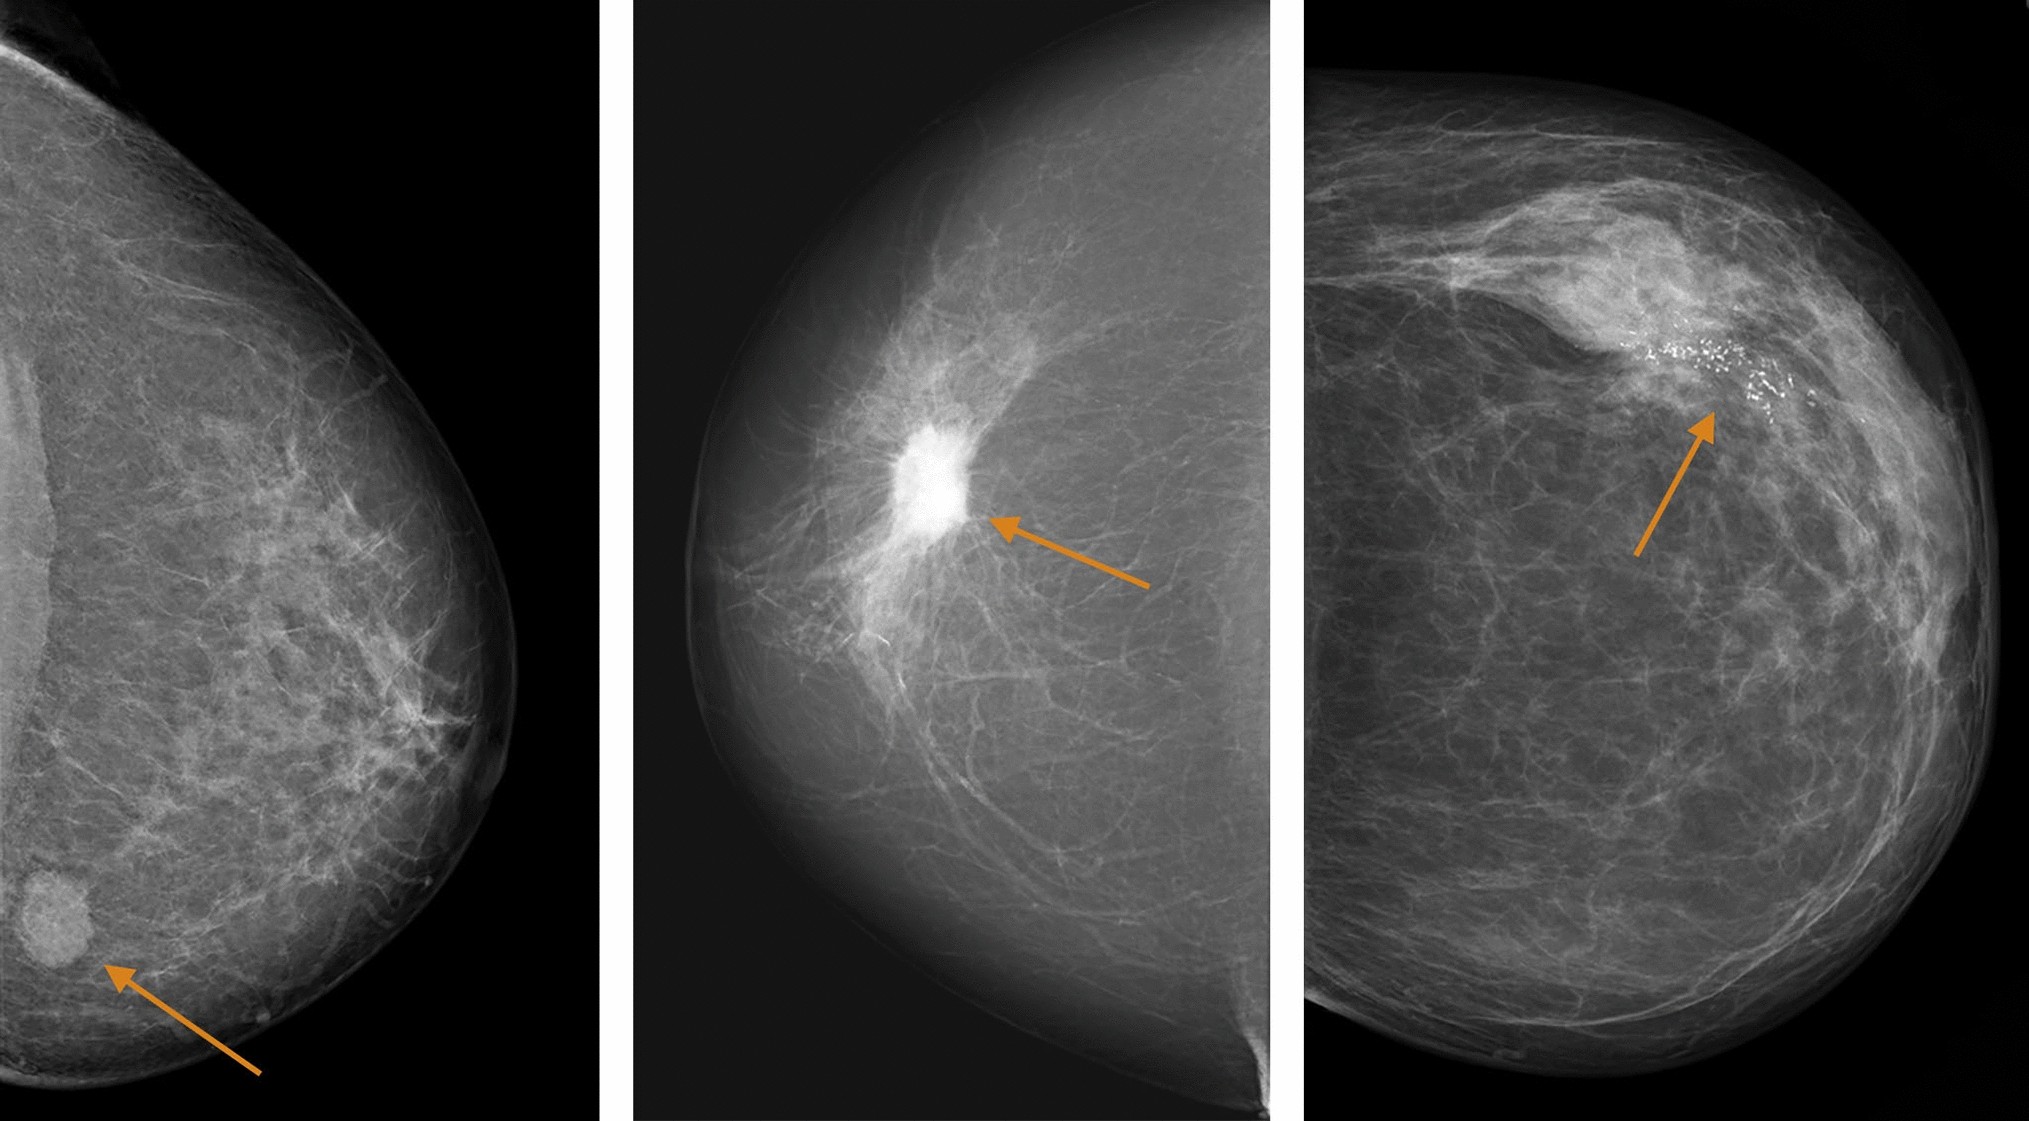 A) Bilateral medio-lateral mammograms revealed asymmetric breast